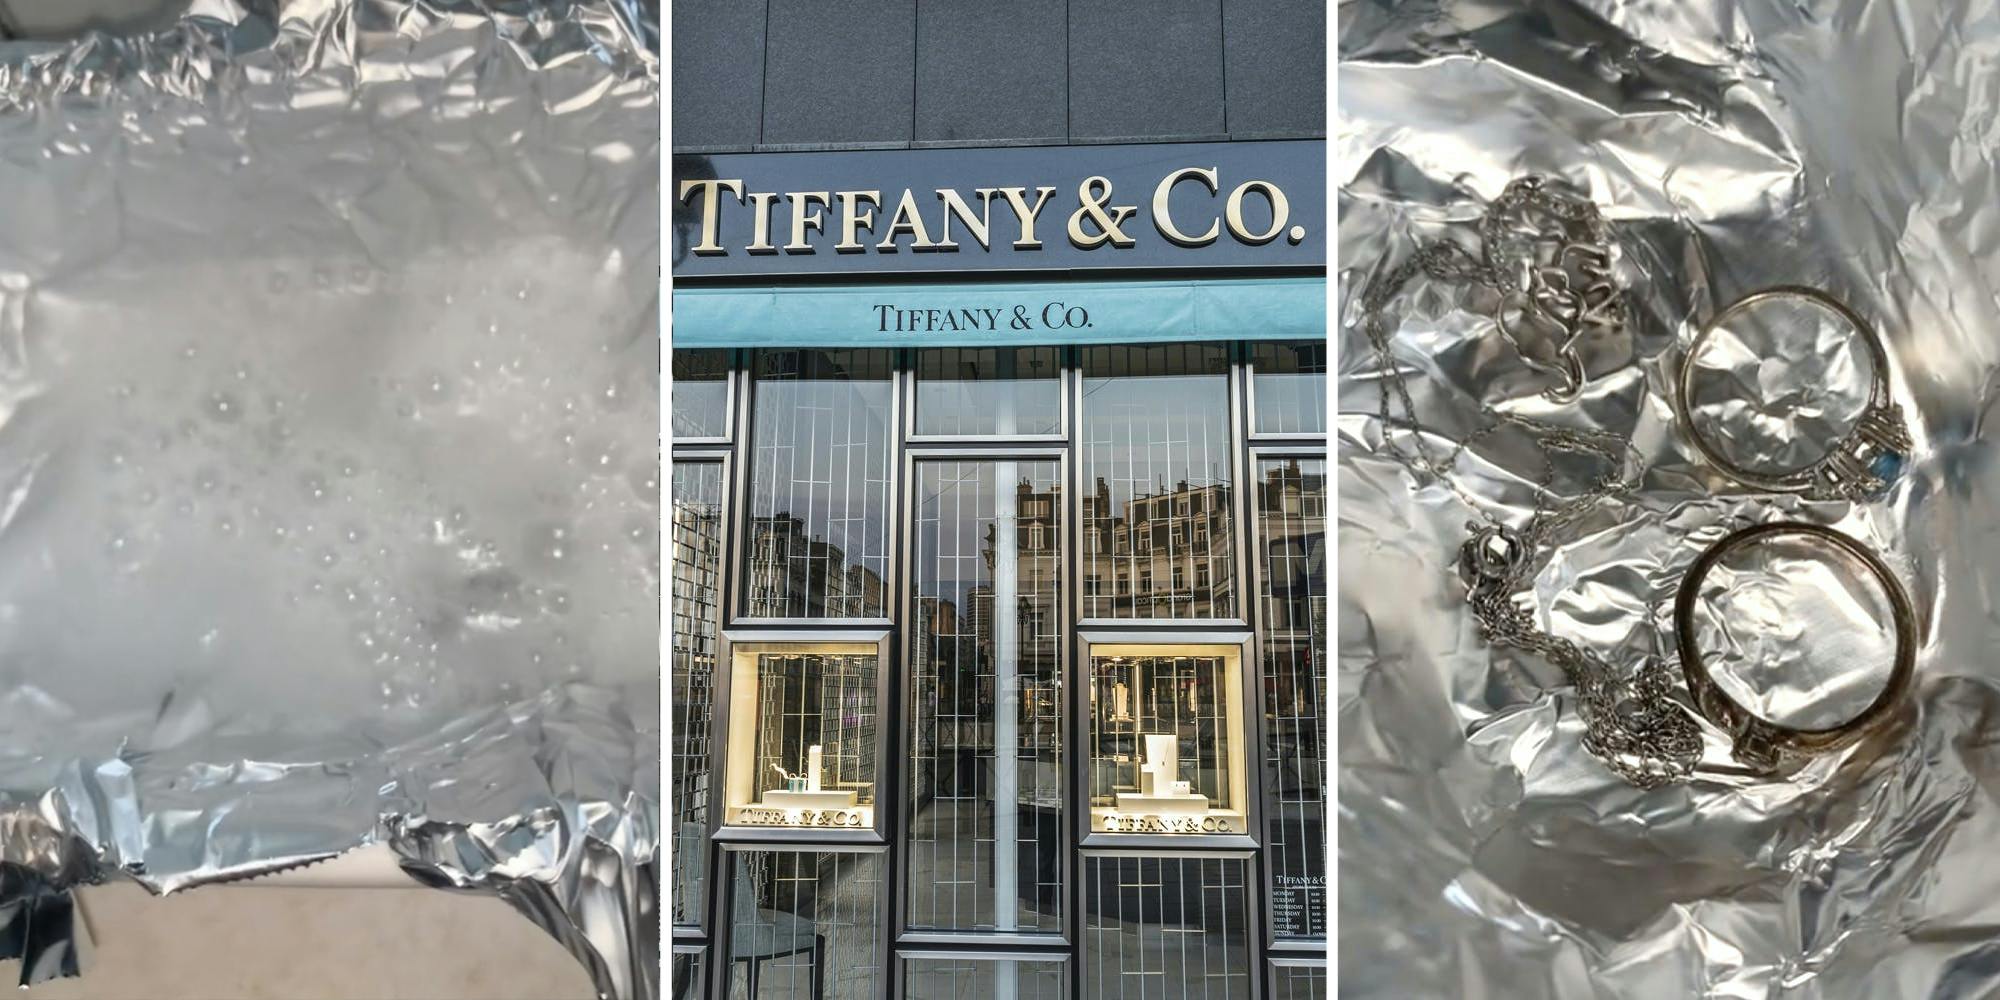 Former Tiffany & Co Worker Says Stuff Is Cheaply Made